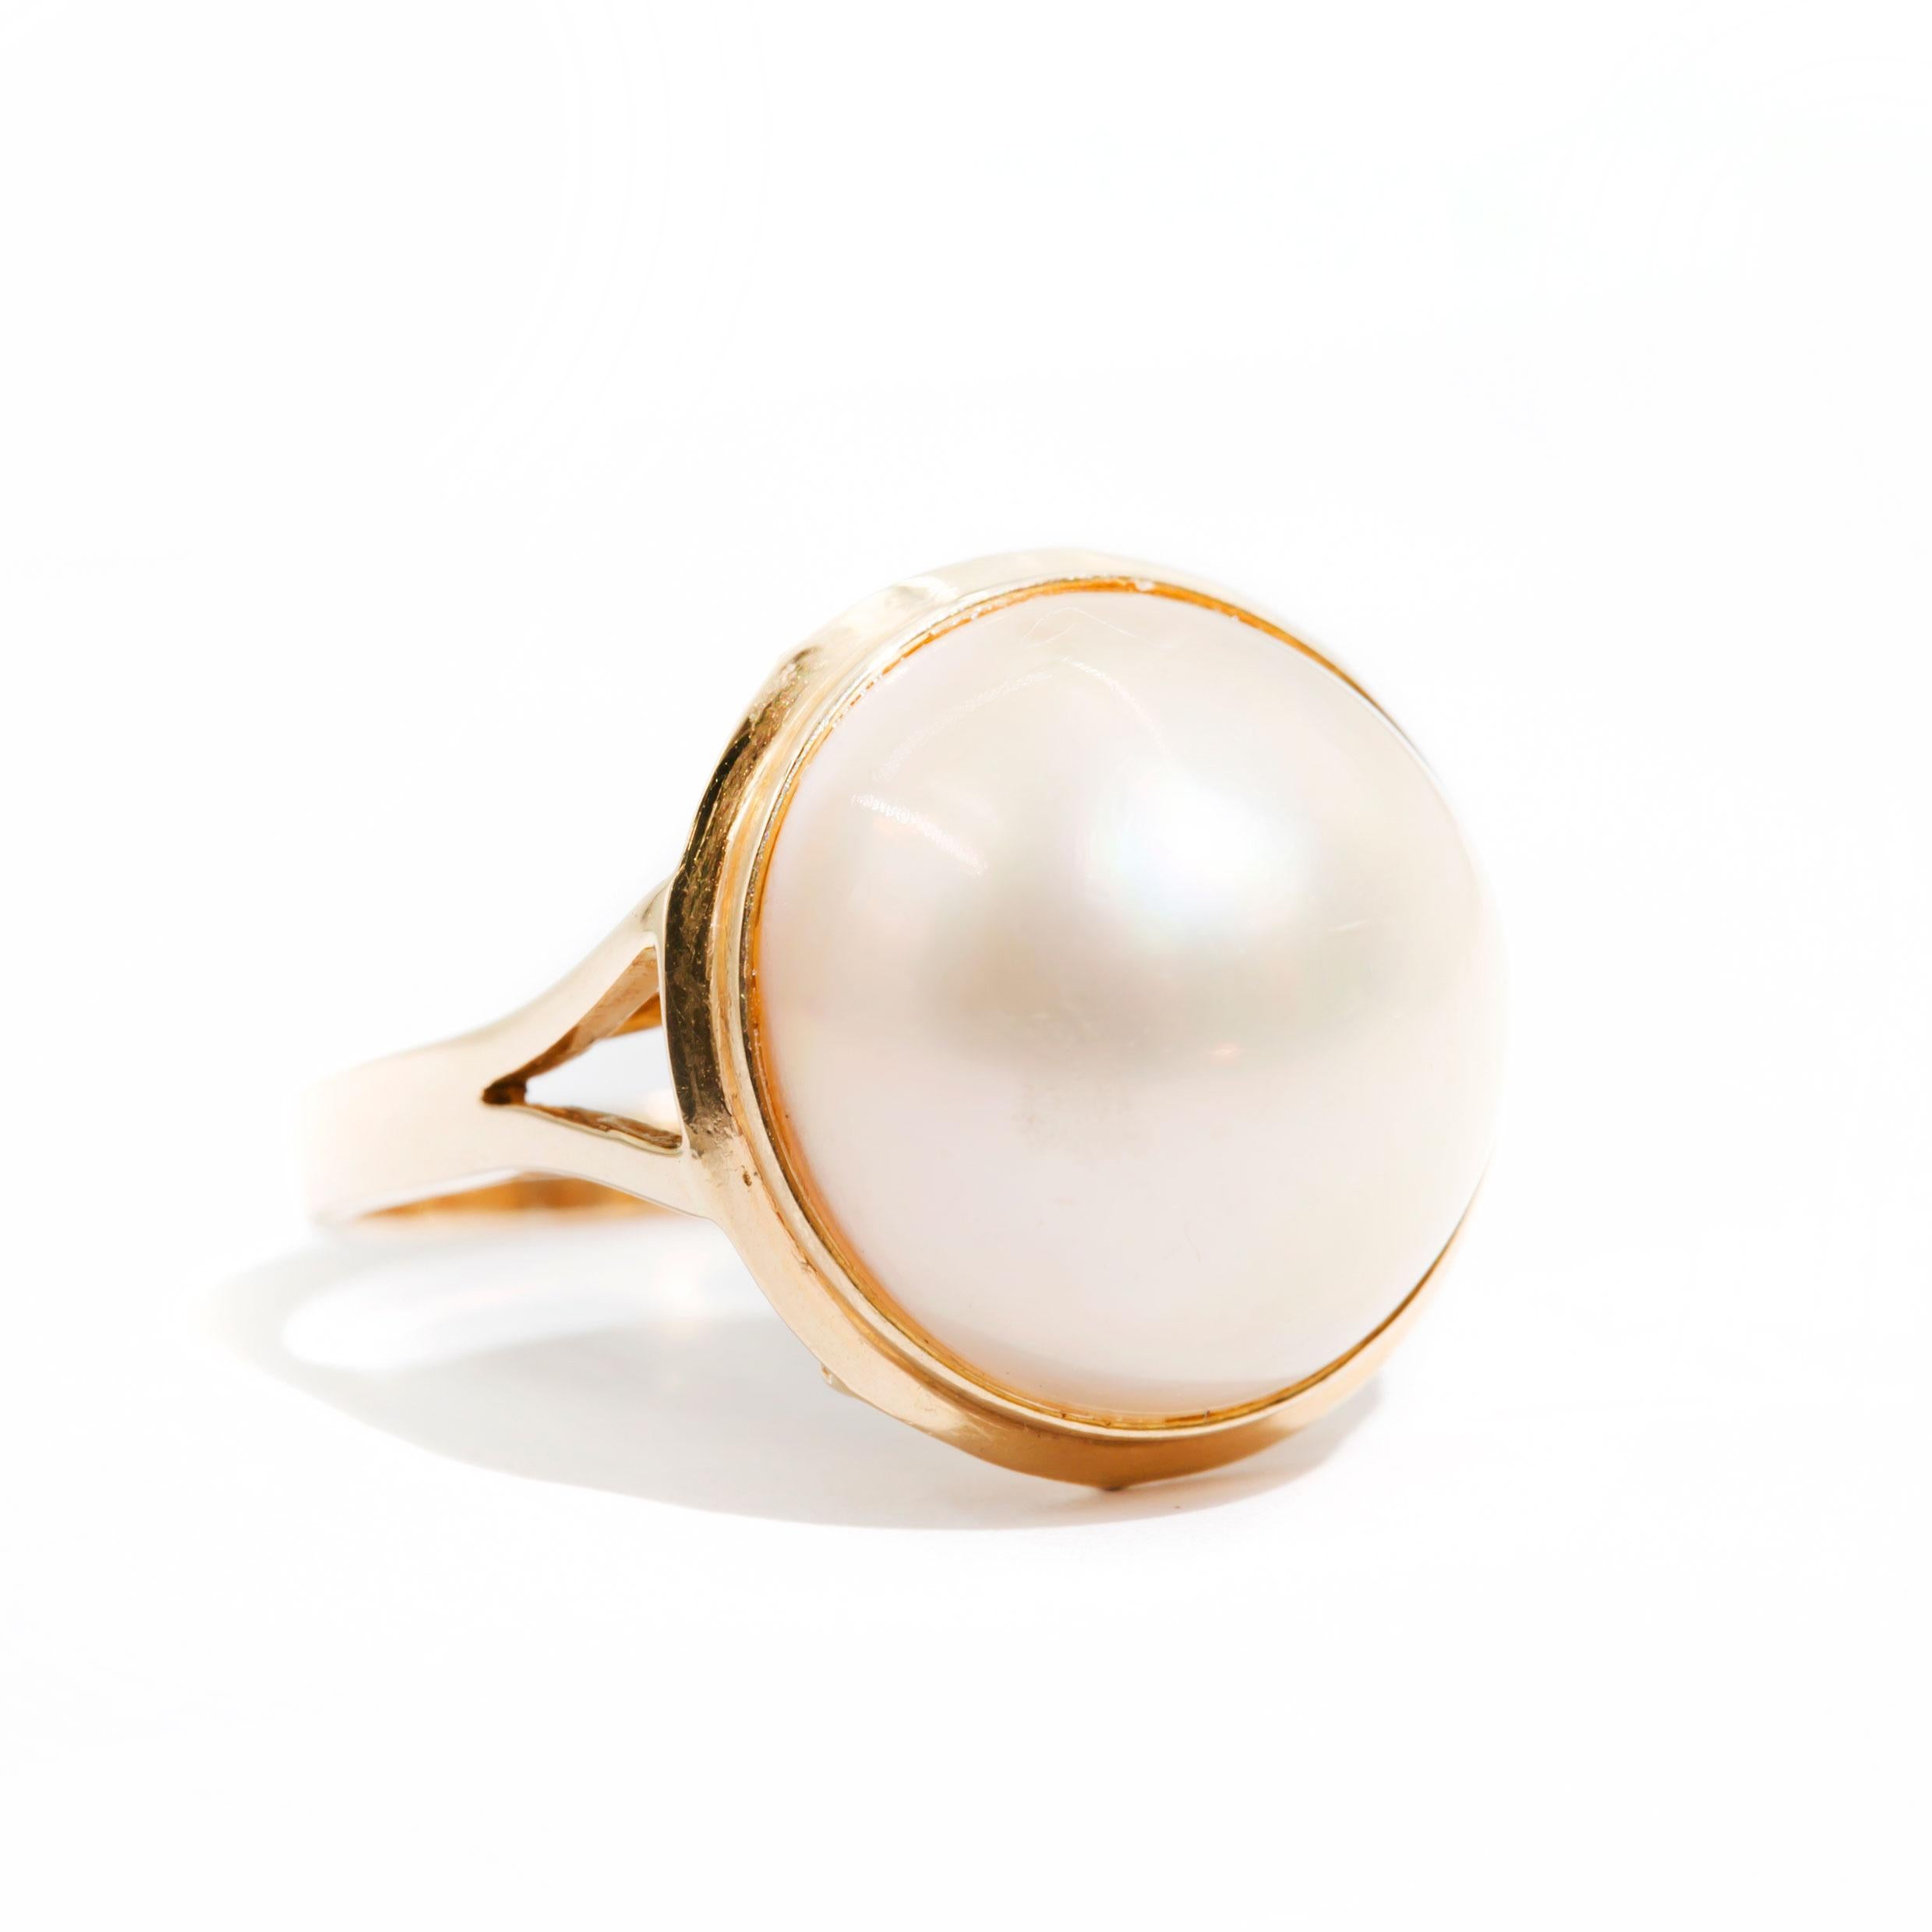 Forged in 9 carat yellow gold is this darling vintage ring featuring a central white round 14 millimetre Mabe pearl carefully set in an intricate basket. The Emma Ring is a heart warming design that transitions easily from day into evening, making